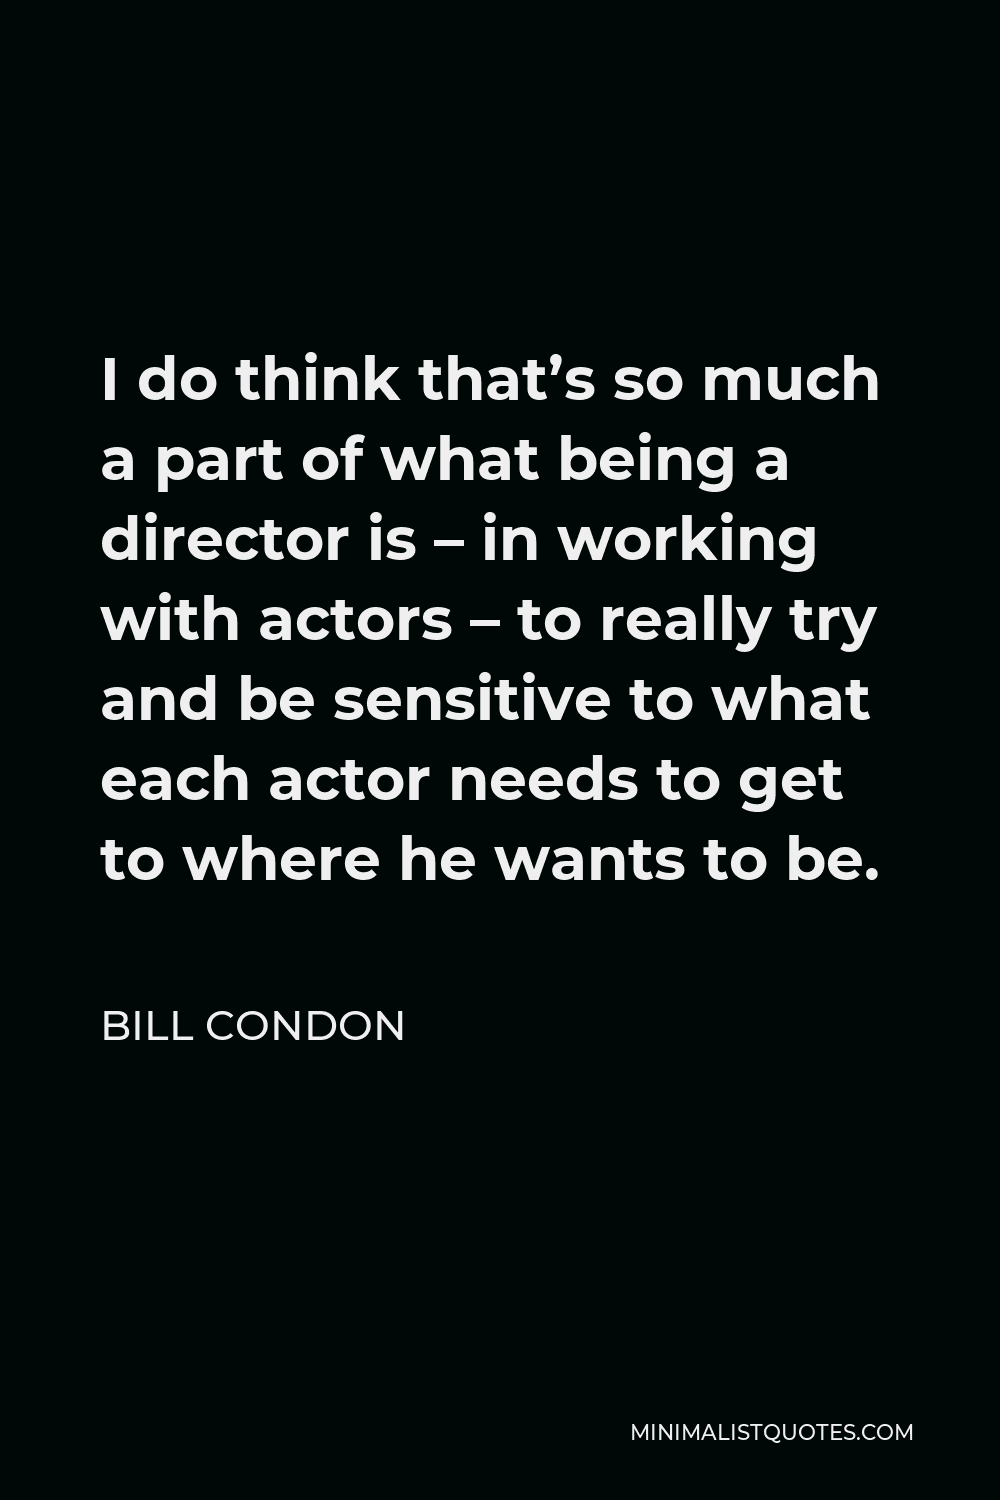 Bill Condon Quote - I do think that’s so much a part of what being a director is – in working with actors – to really try and be sensitive to what each actor needs to get to where he wants to be.